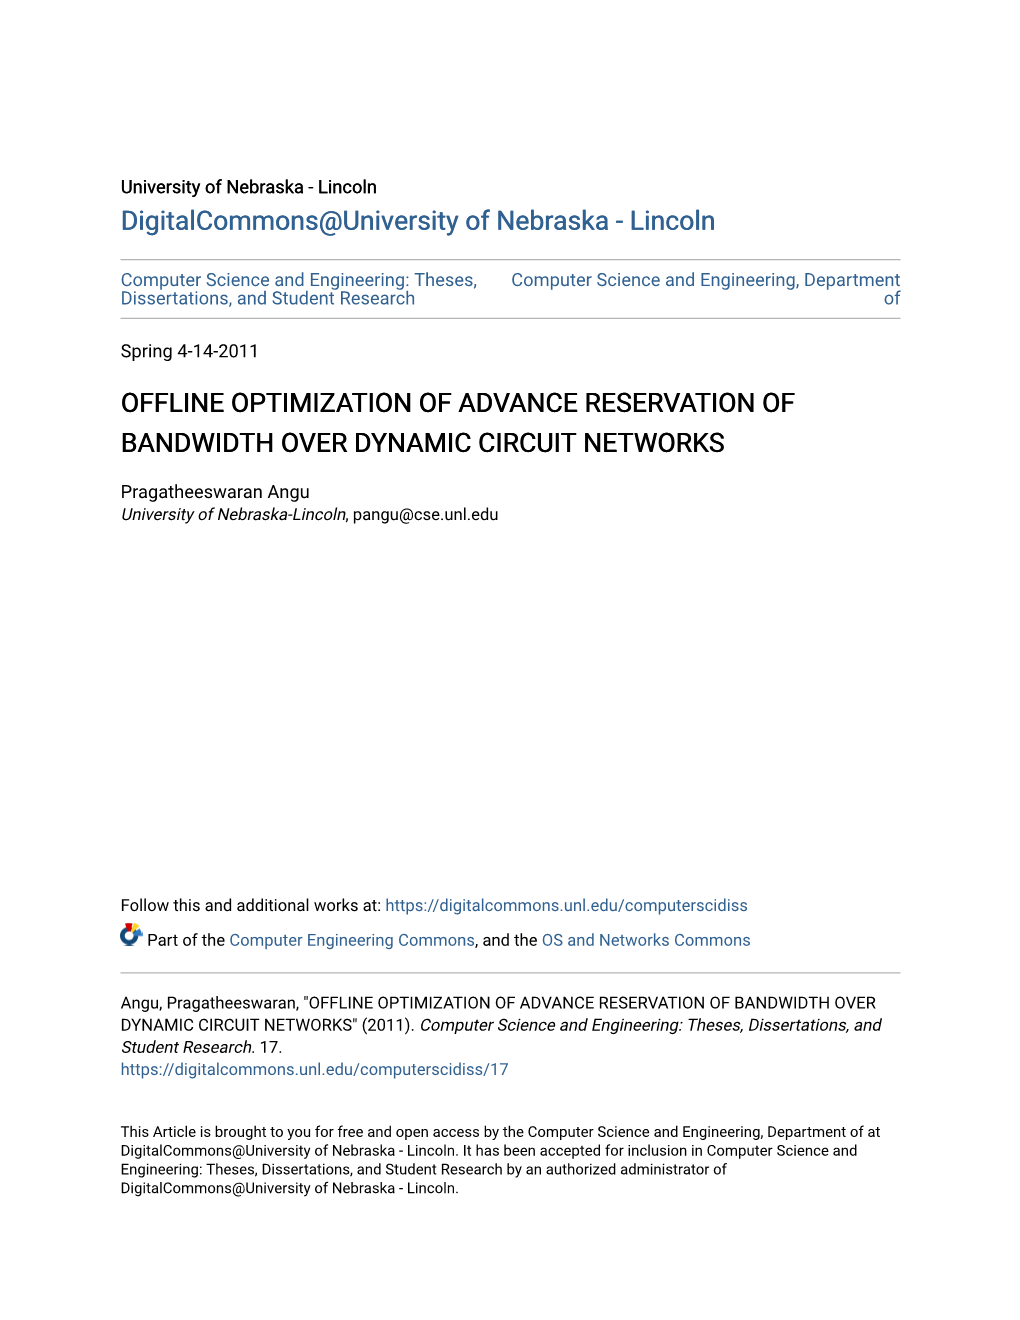 Offline Optimization of Advance Reservation of Bandwidth Over Dynamic Circuit Networks